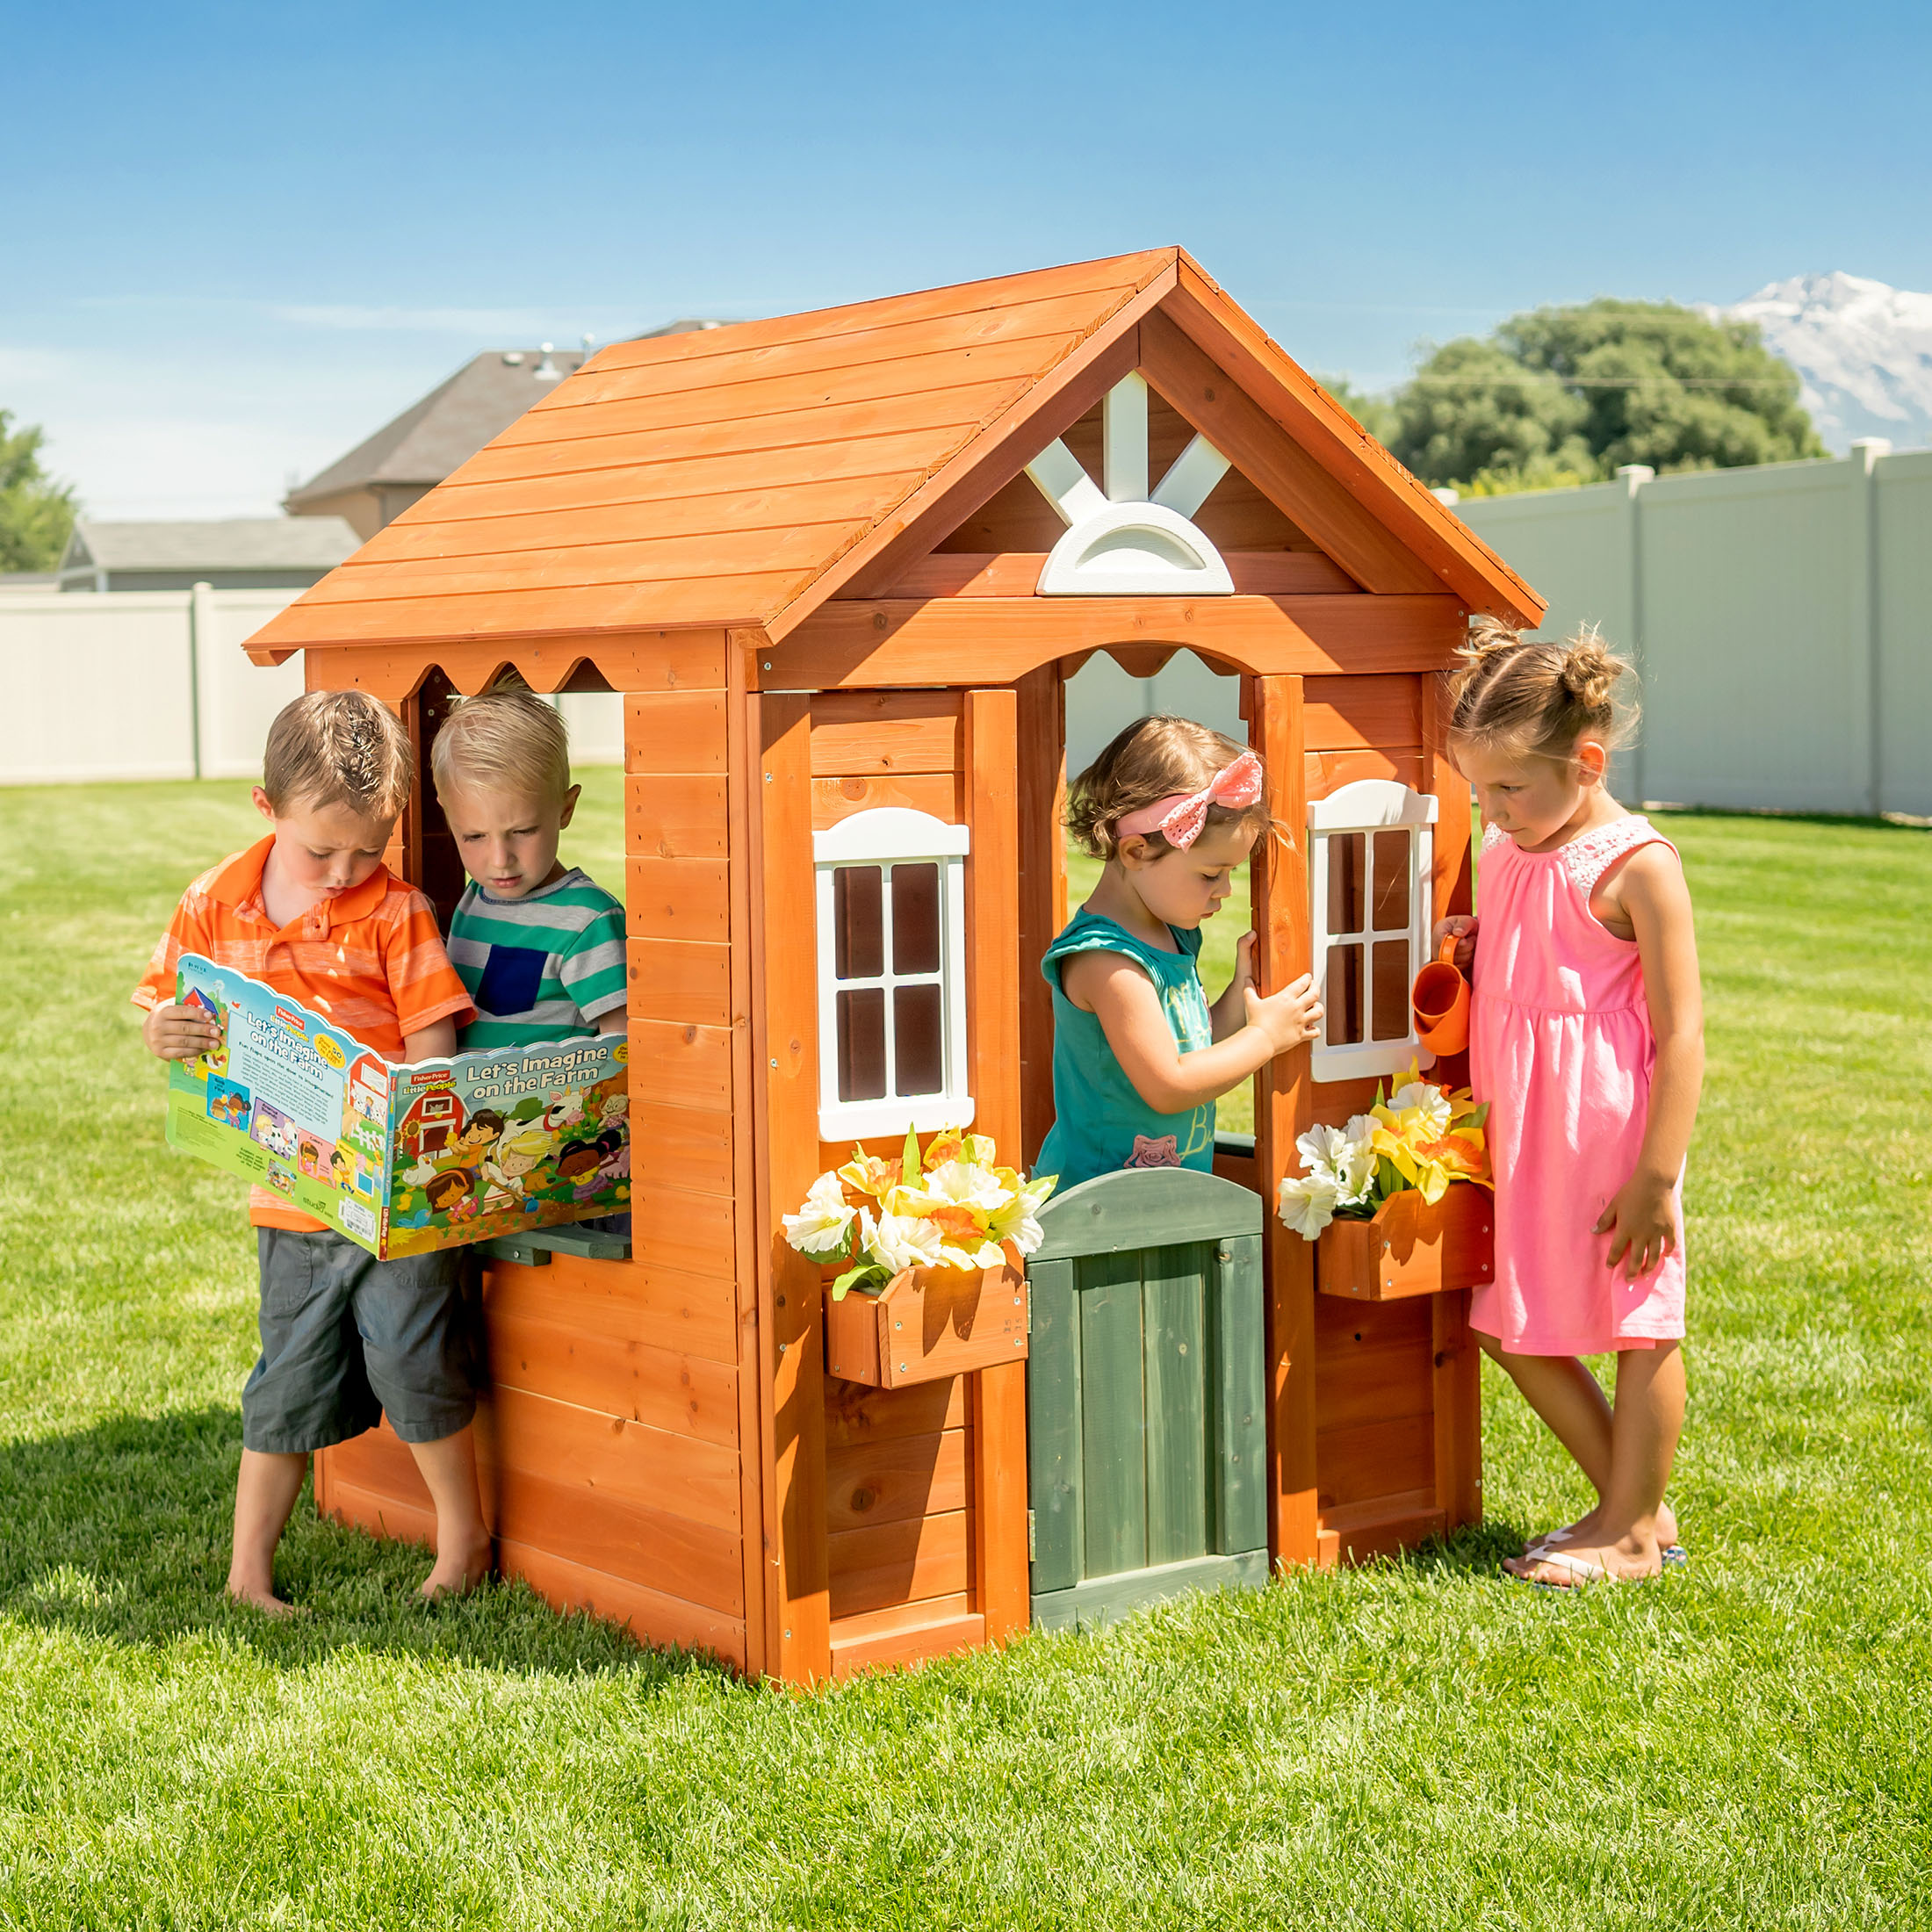 Sportspower Bellevue Kids Wooden Playhouse with Fun Colored Working Front Door, White Trim Windows, and Flower Pot Holders - image 1 of 13